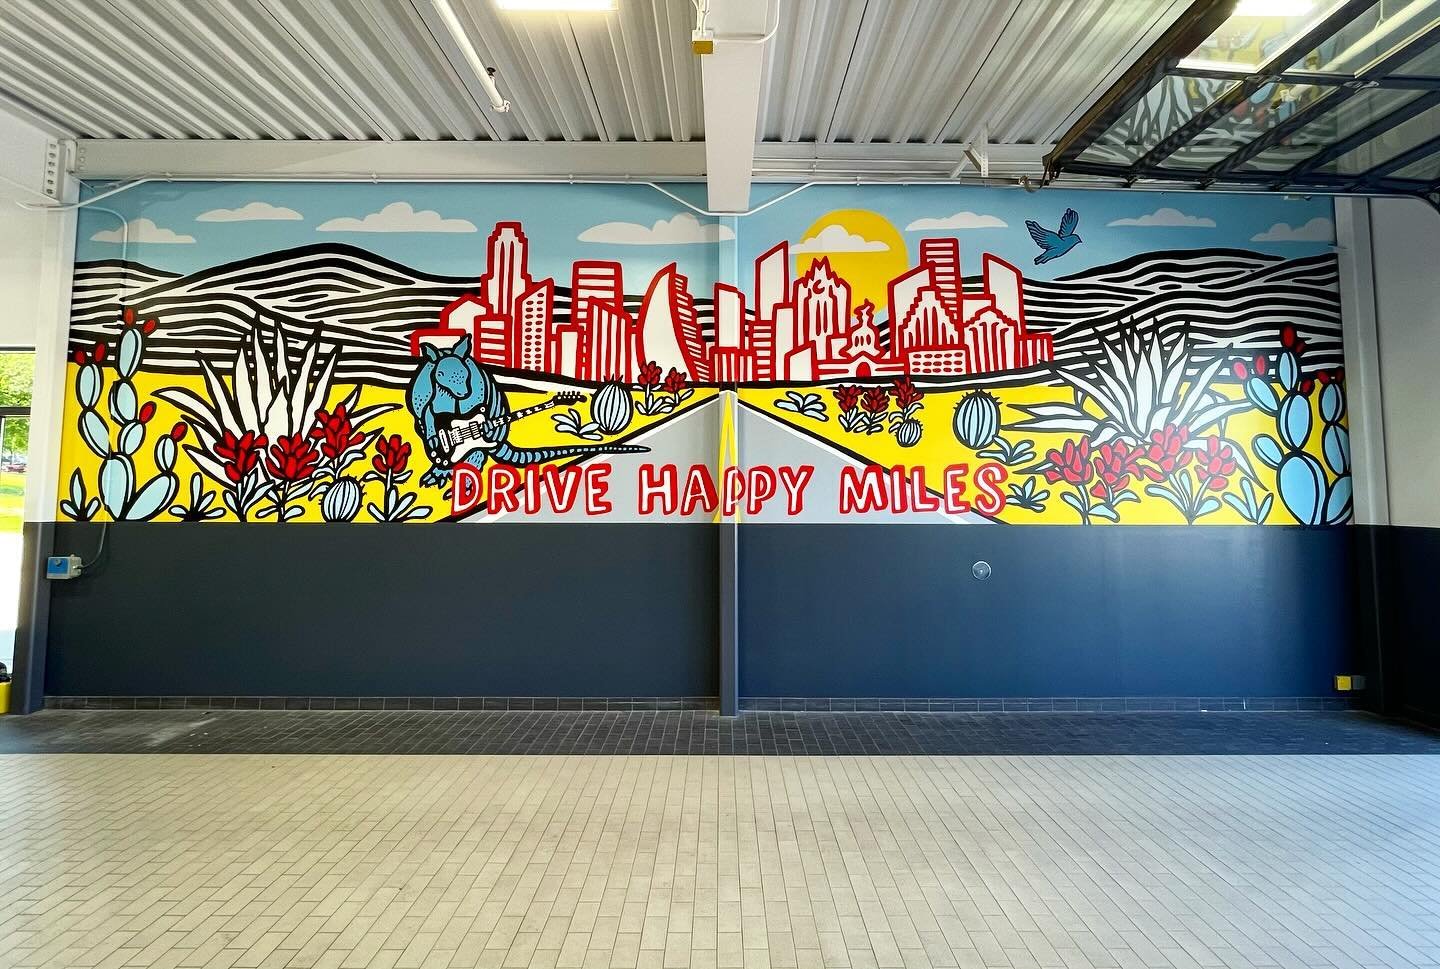 New mural at @citylimitsnissan! It was a complete joy painting this one. Thank you all so much for having us out to brighten up your service center.
&bull;
🎨&amp;🕺assist: @devinwatlington and @lizafishbone
&bull;
#allthehashtags #mural #murals #wal